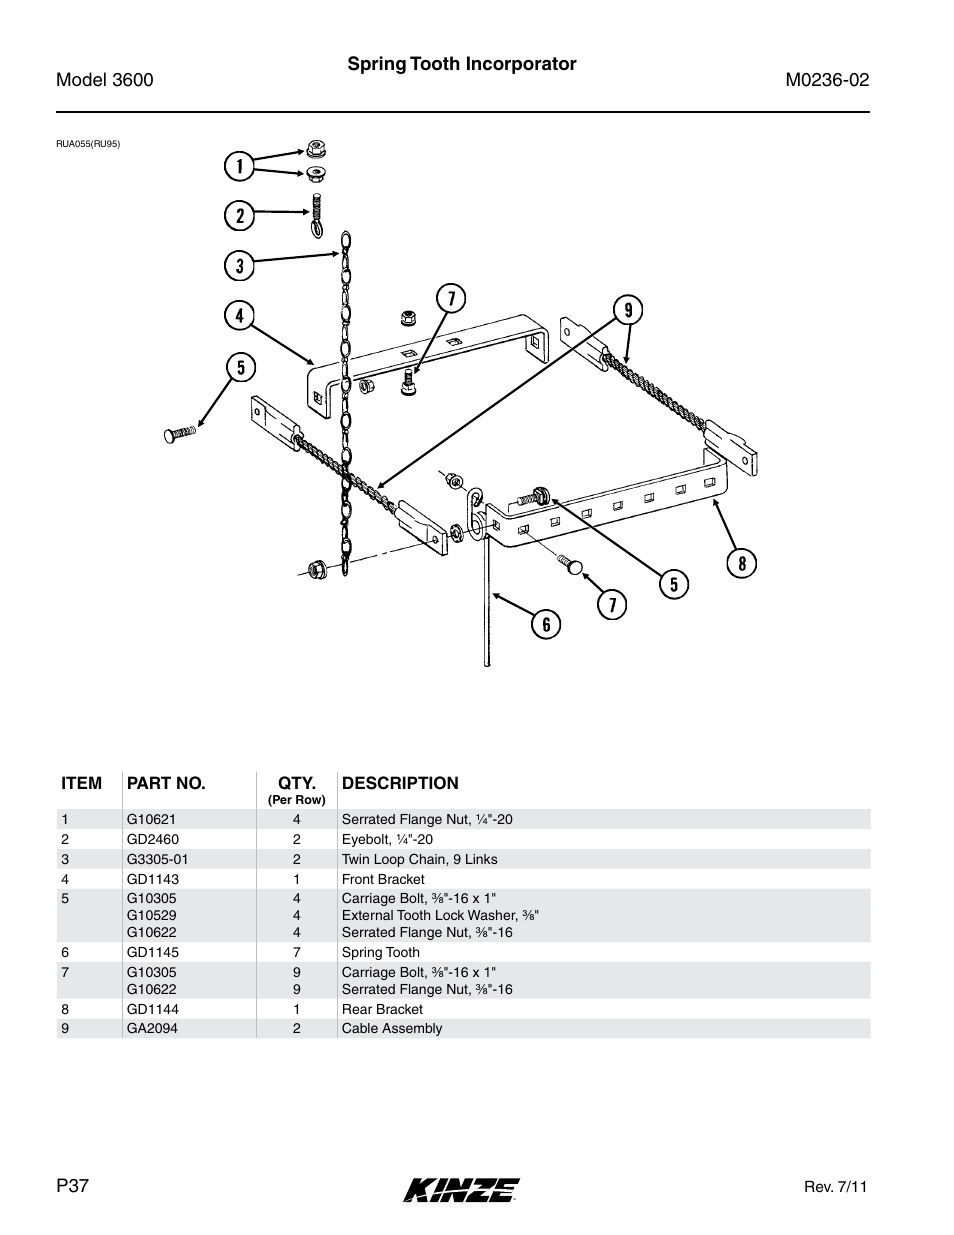 Spring tooth incorporator | Kinze 3600 Lift and Rotate Planter Rev. 5/14 User Manual | Page 40 / 302